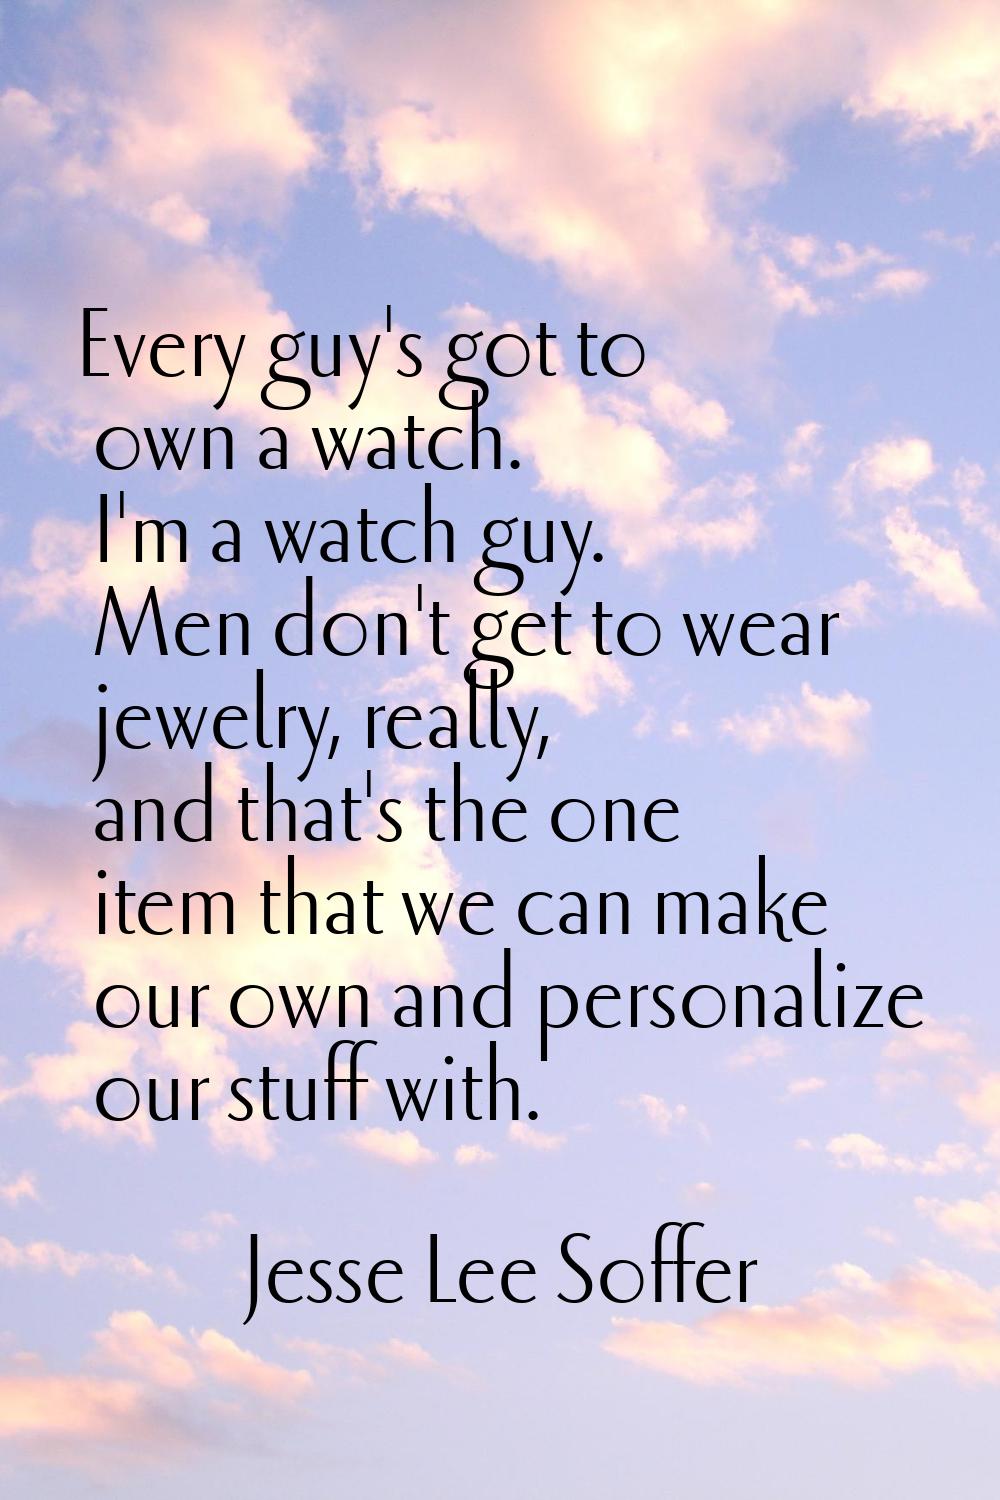 Every guy's got to own a watch. I'm a watch guy. Men don't get to wear jewelry, really, and that's 